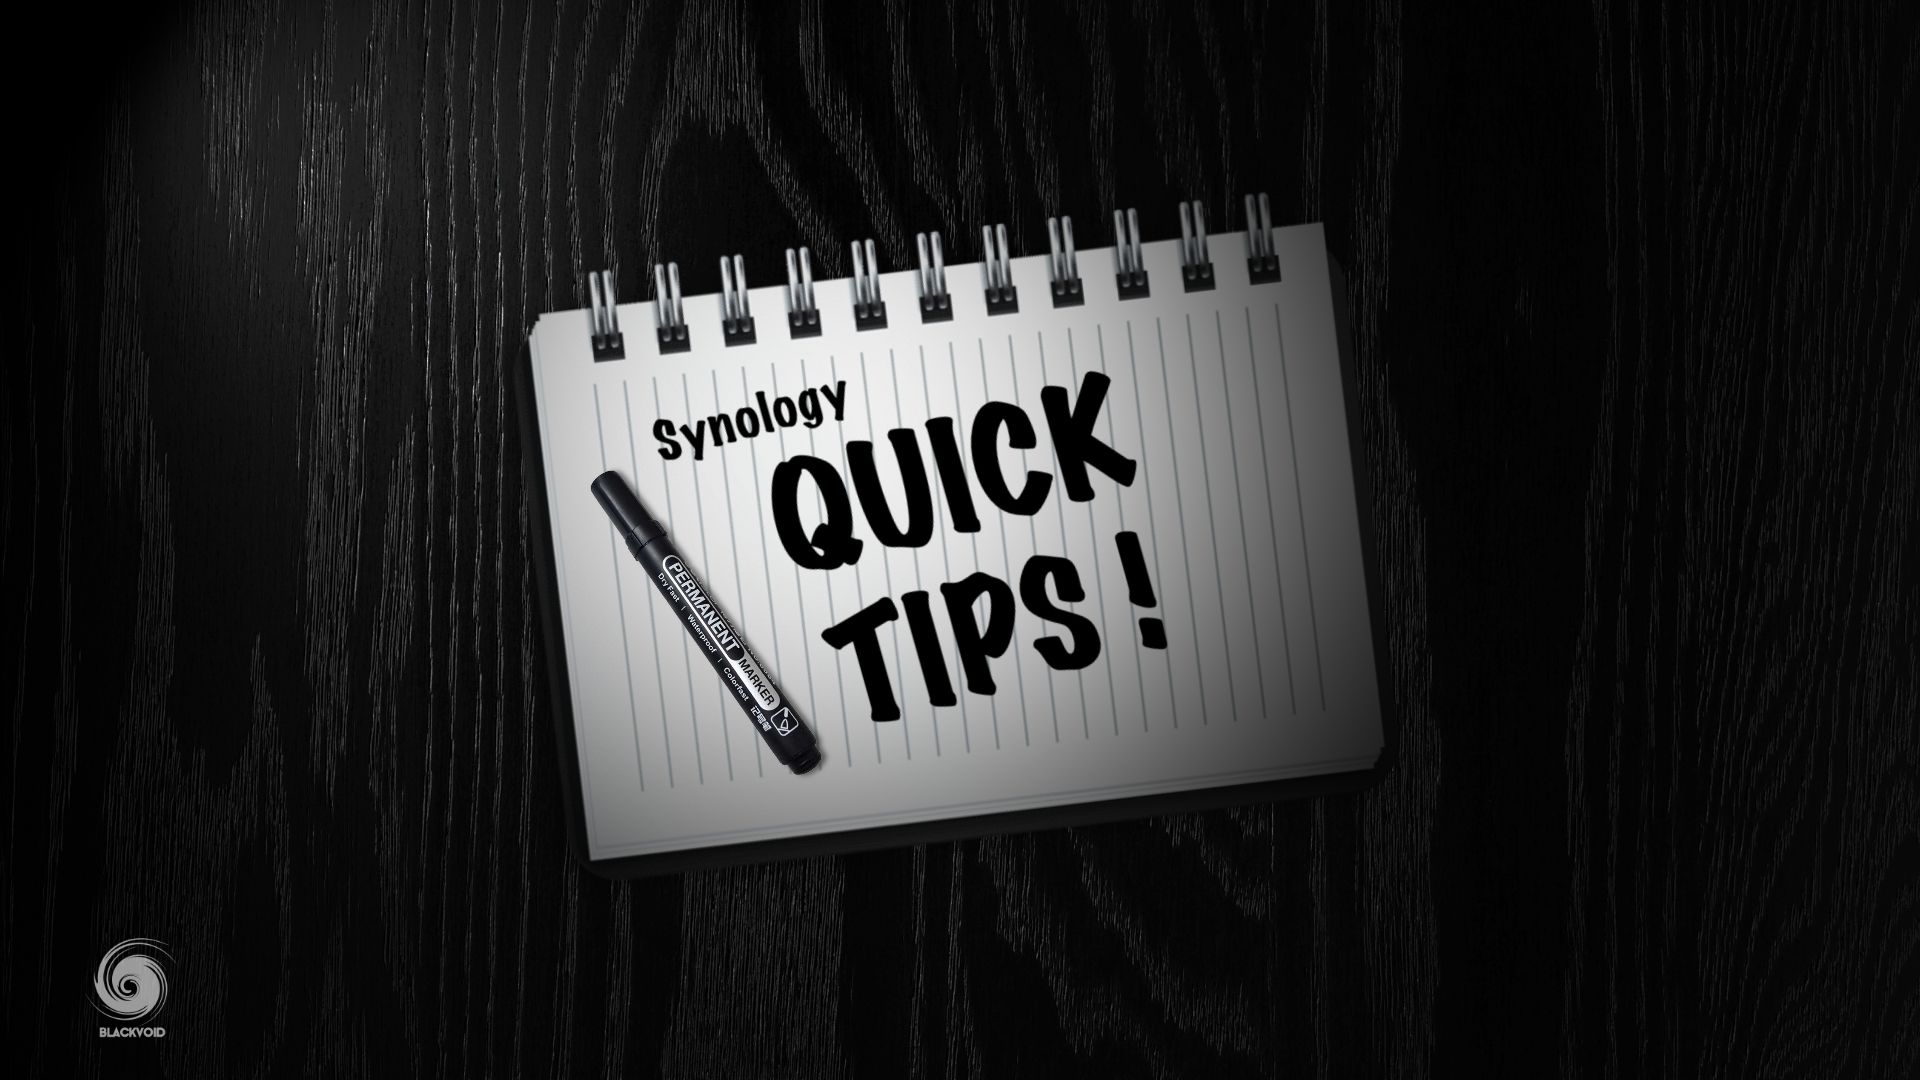 Synology quick tips!